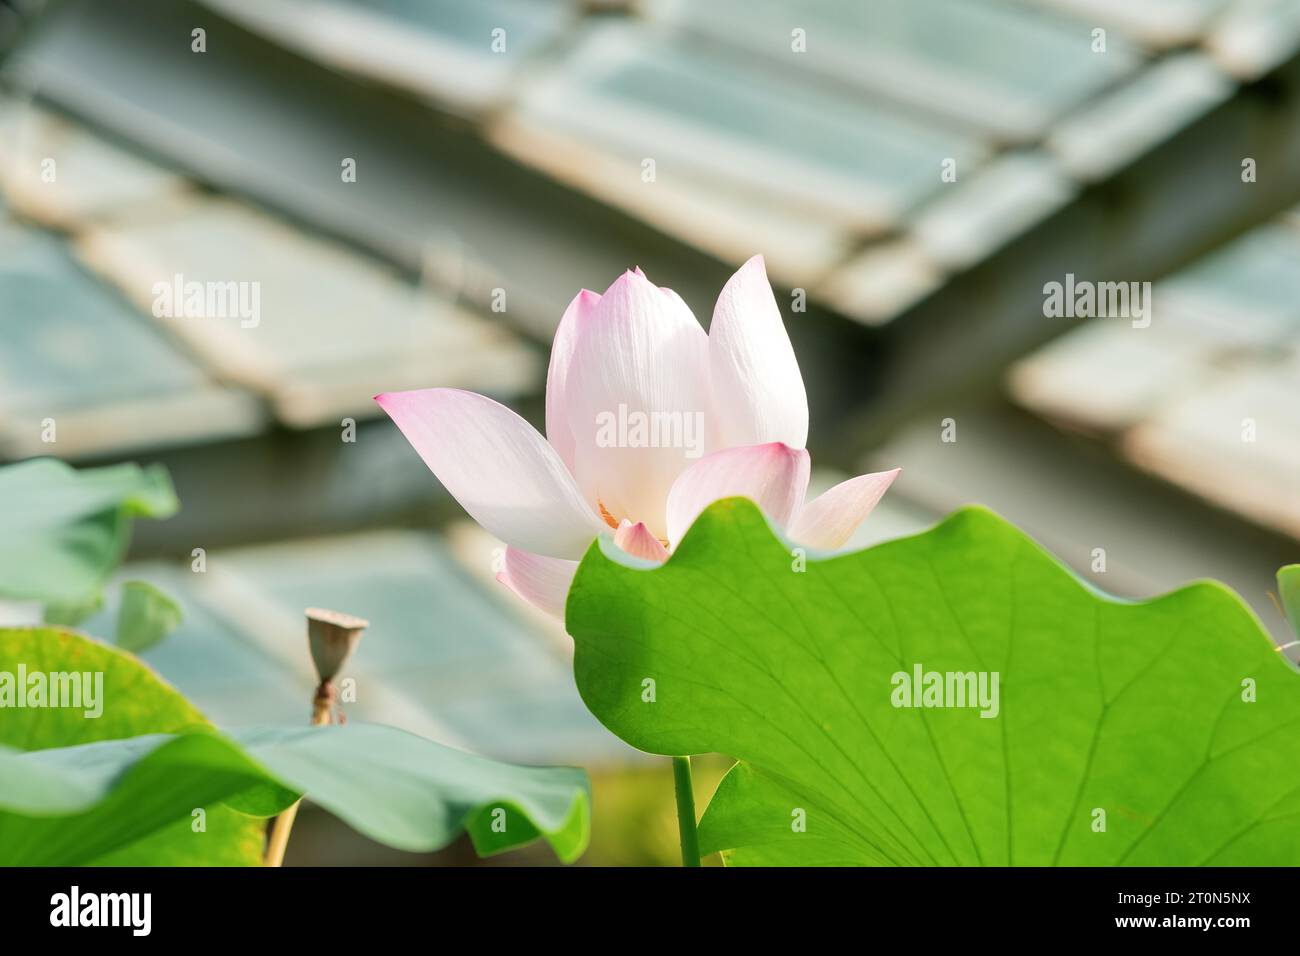 light pink lotus flower under the dome of the greenhouse Stock Photo